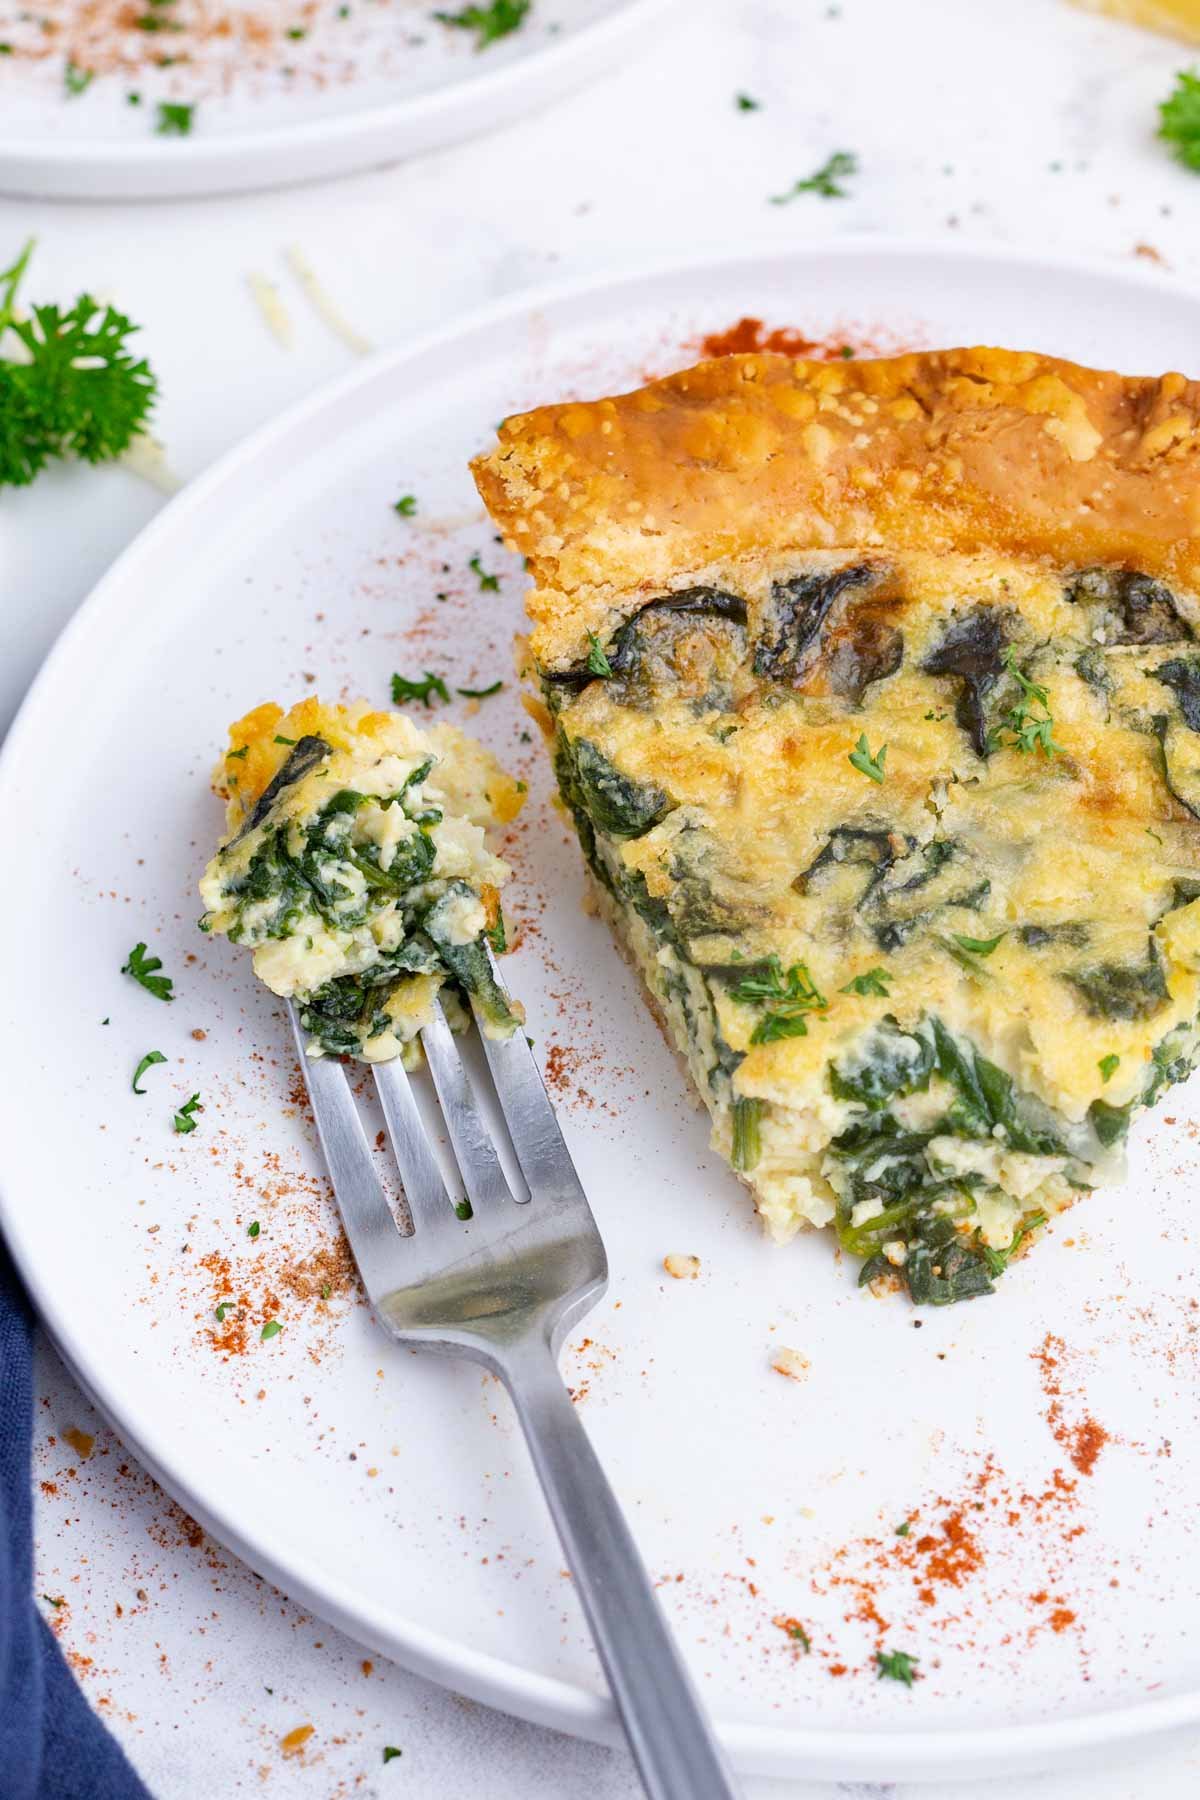 Enjoy this Quiche Florentine recipe on holidays or any day of the week.